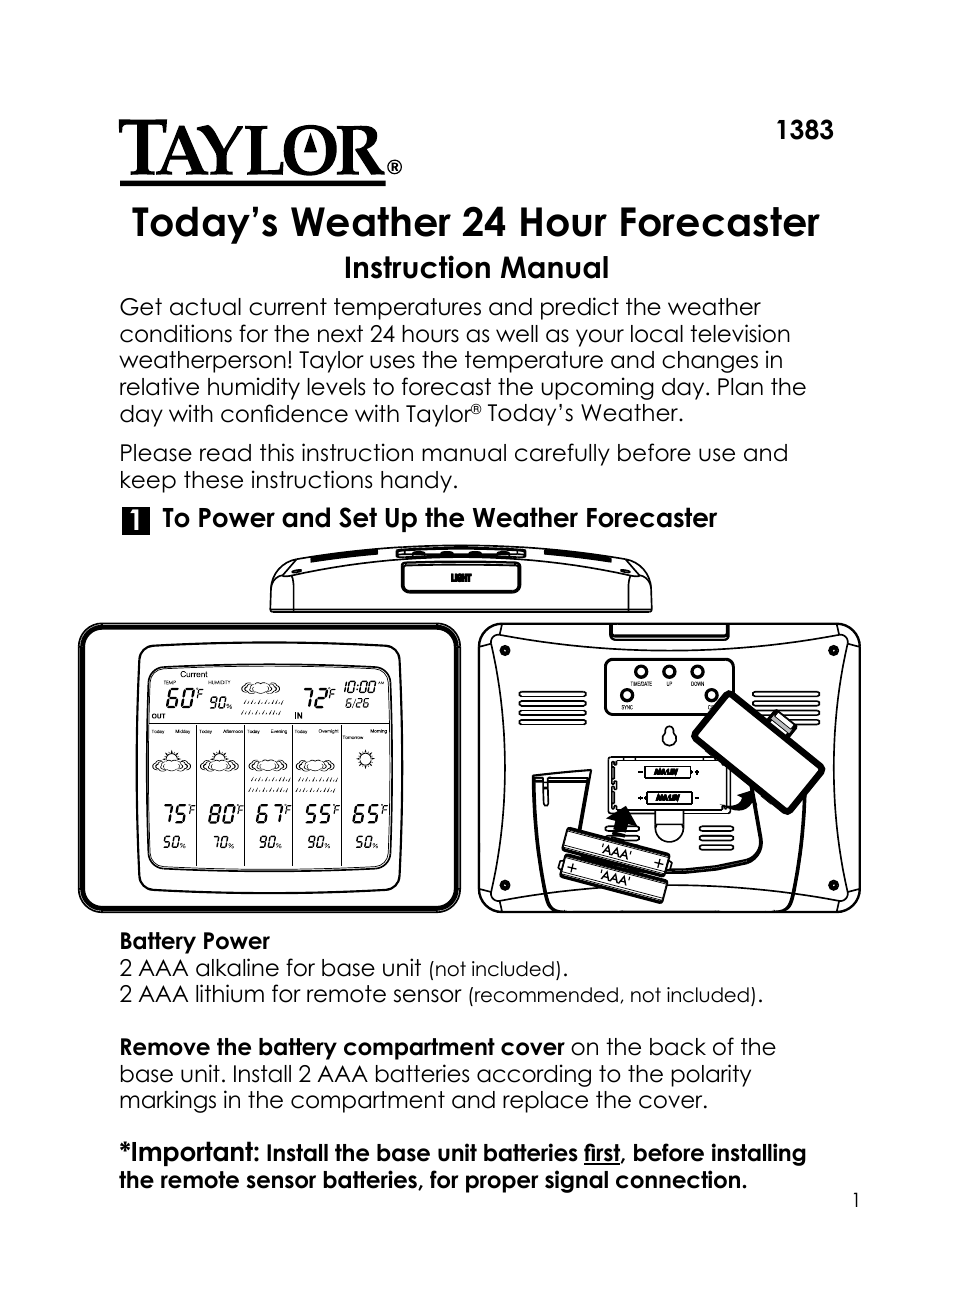 Today's weather 24 hour forecaster 1383